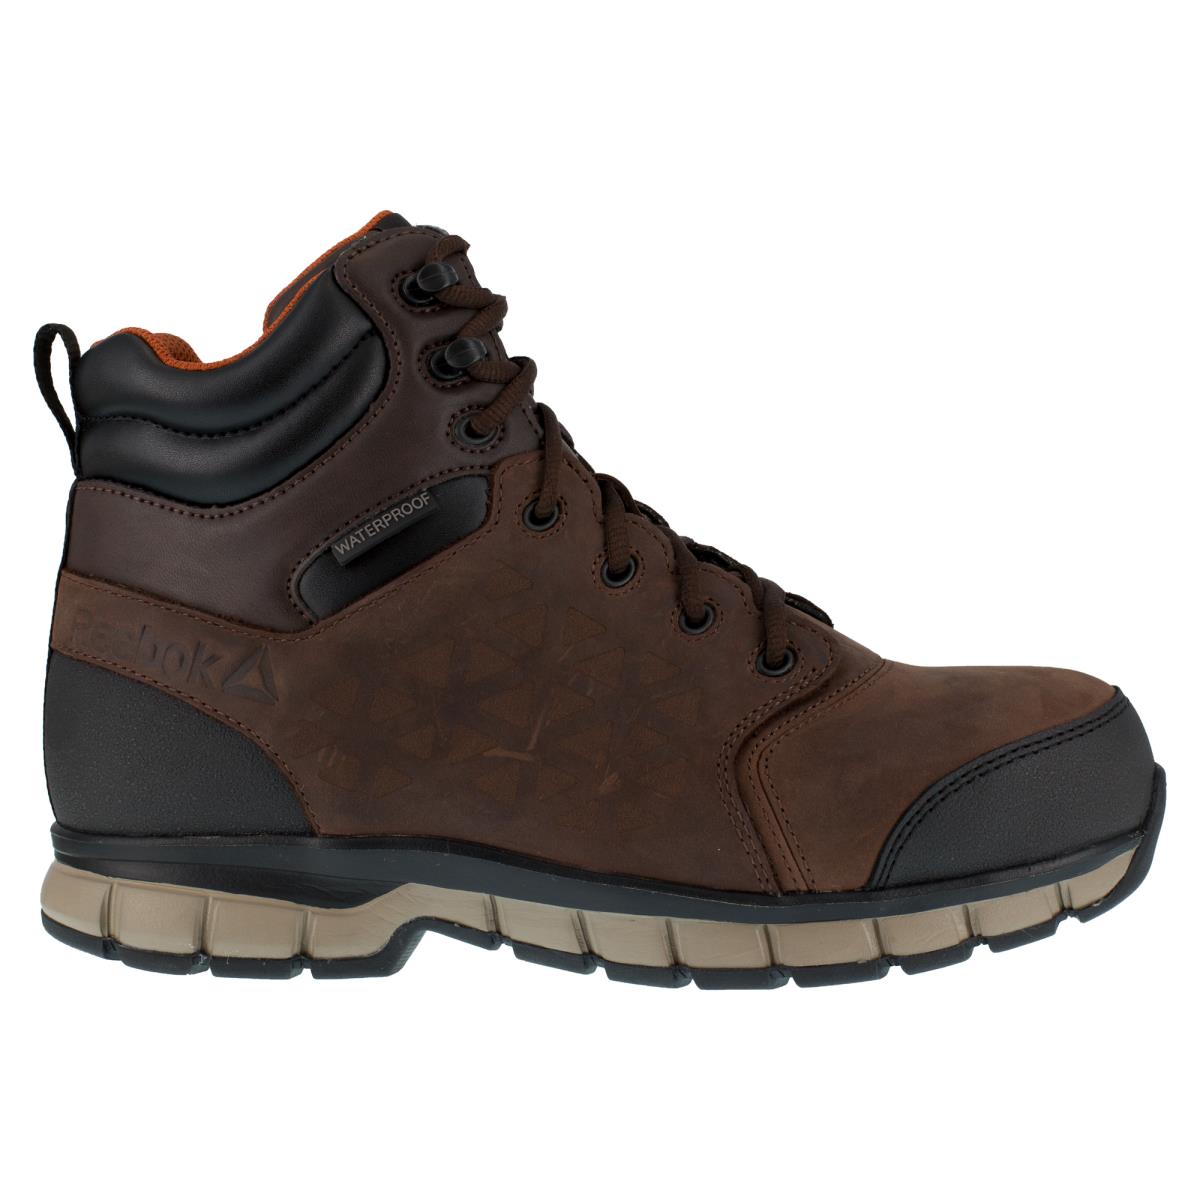 Reebok Mens Brown Leather Work Boots Sublite Cushion Work 6in CT W